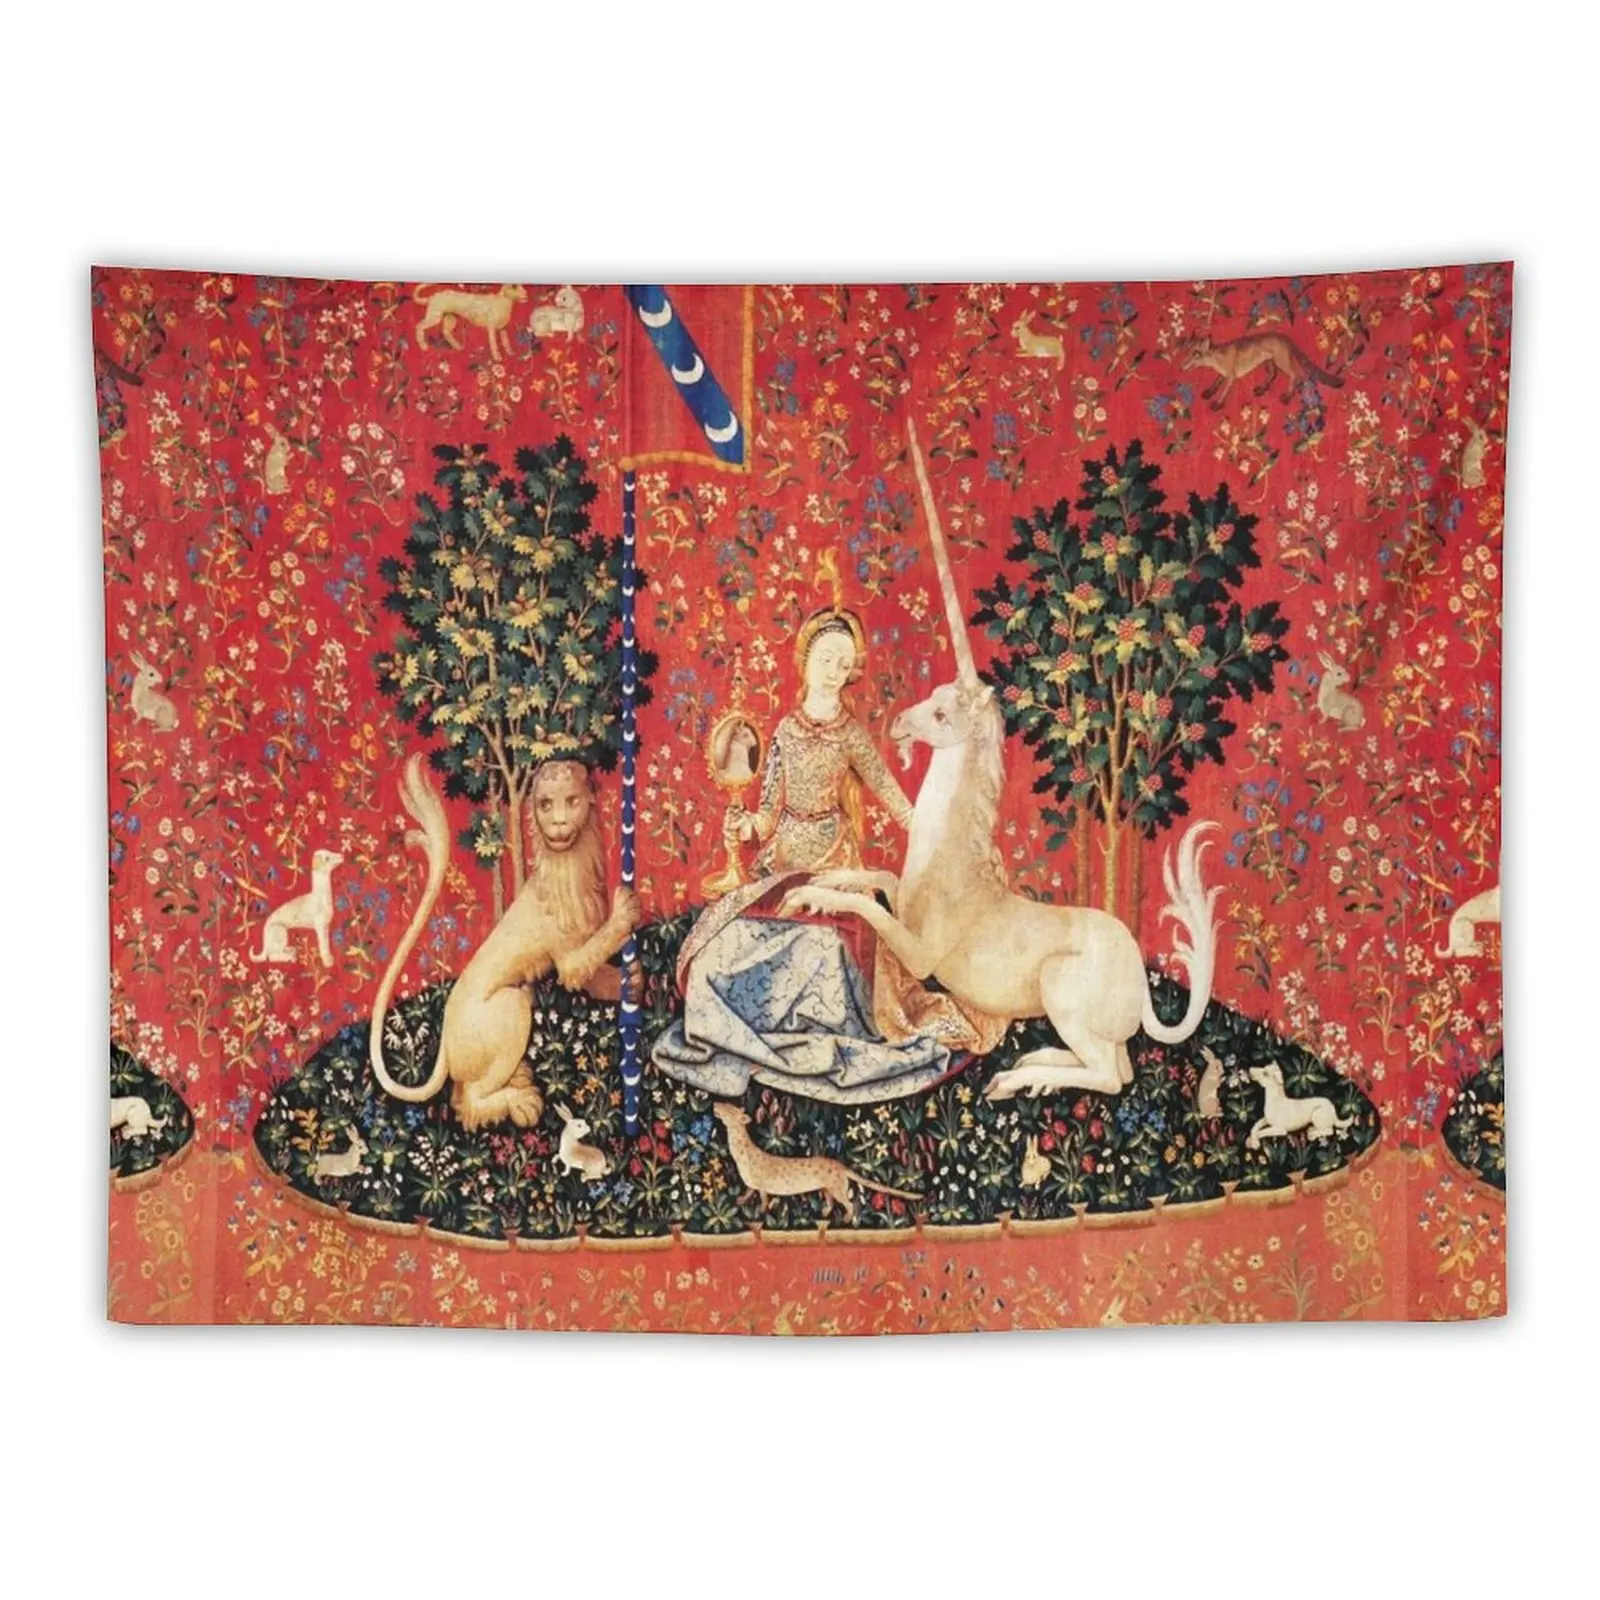 

LADY AND UNICORN ,SIGHTRed Green Fantasy Flowers,Animals Tapestry Aesthetic Room Decorations Room Decor Aesthetic